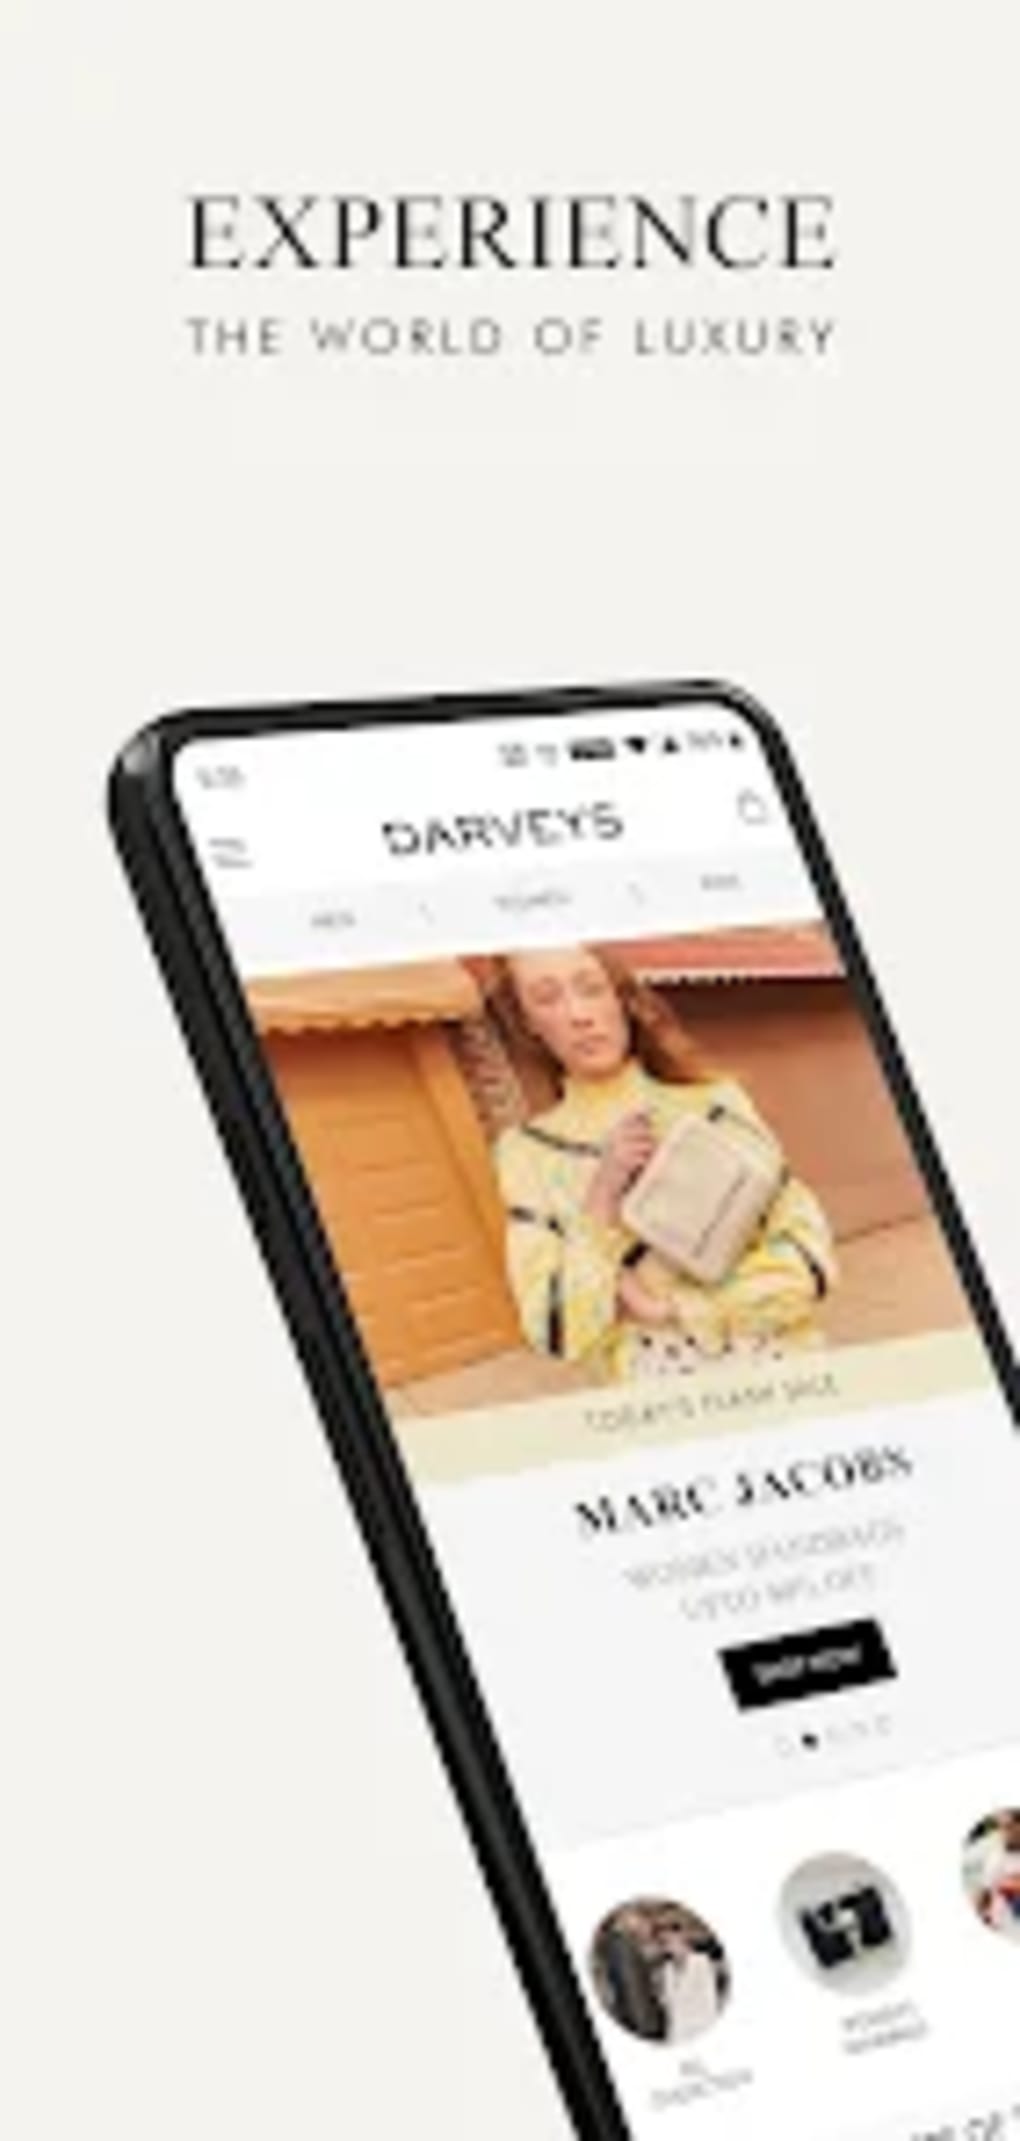 Is Darveys a genuine and authentic website for luxury brands like